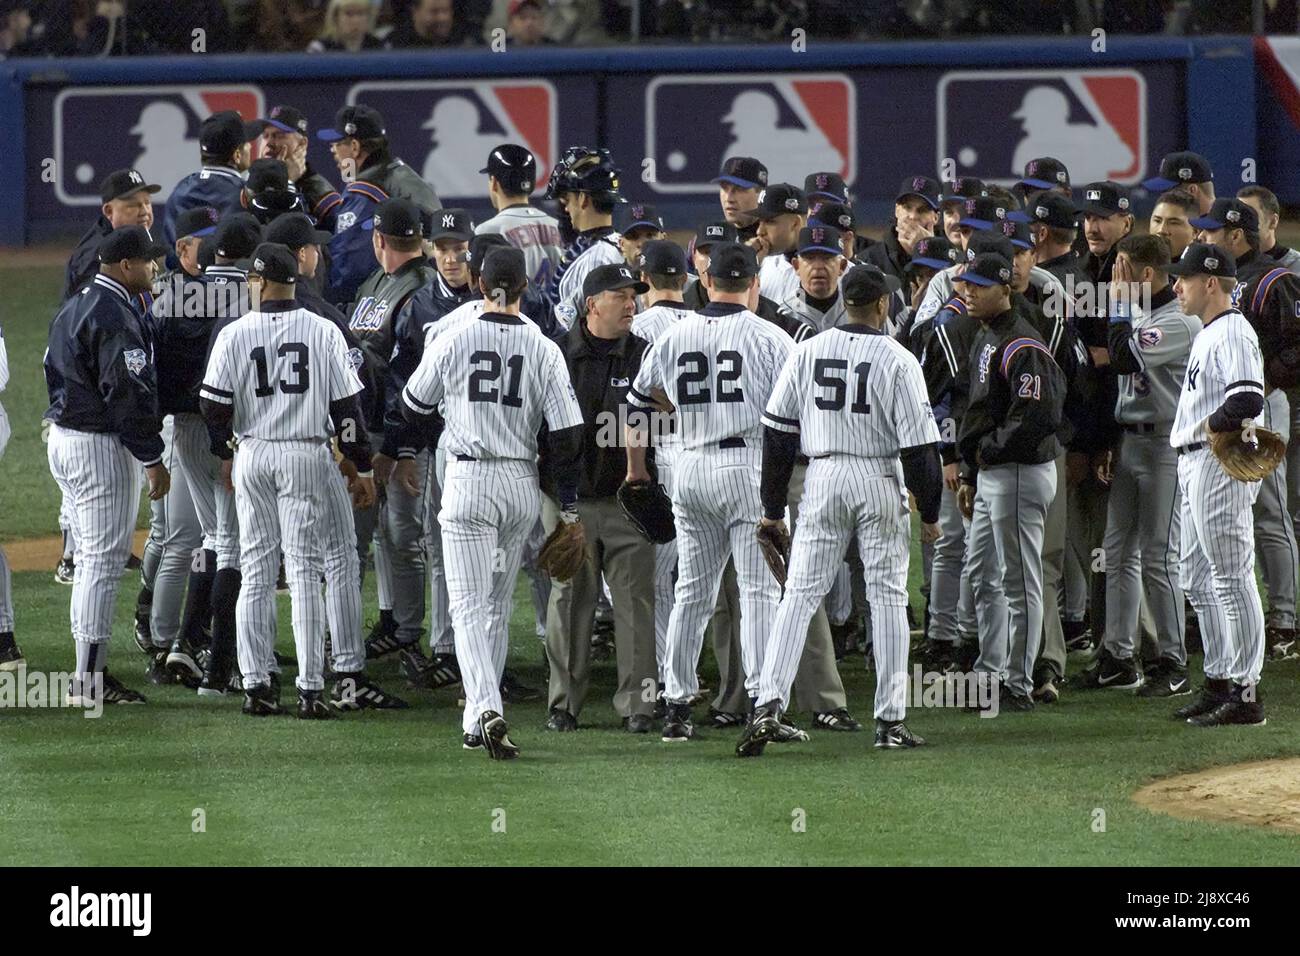 New York Yankees and New York Mets players confront each other after New York Yankees pitcher Roger Clemens threw a bat at New York Mets batter Mike Piazza during World Series Game 1 at Yankees Stadium in New York on October 22, 2000. Photo by Francis Specker Stock Photo